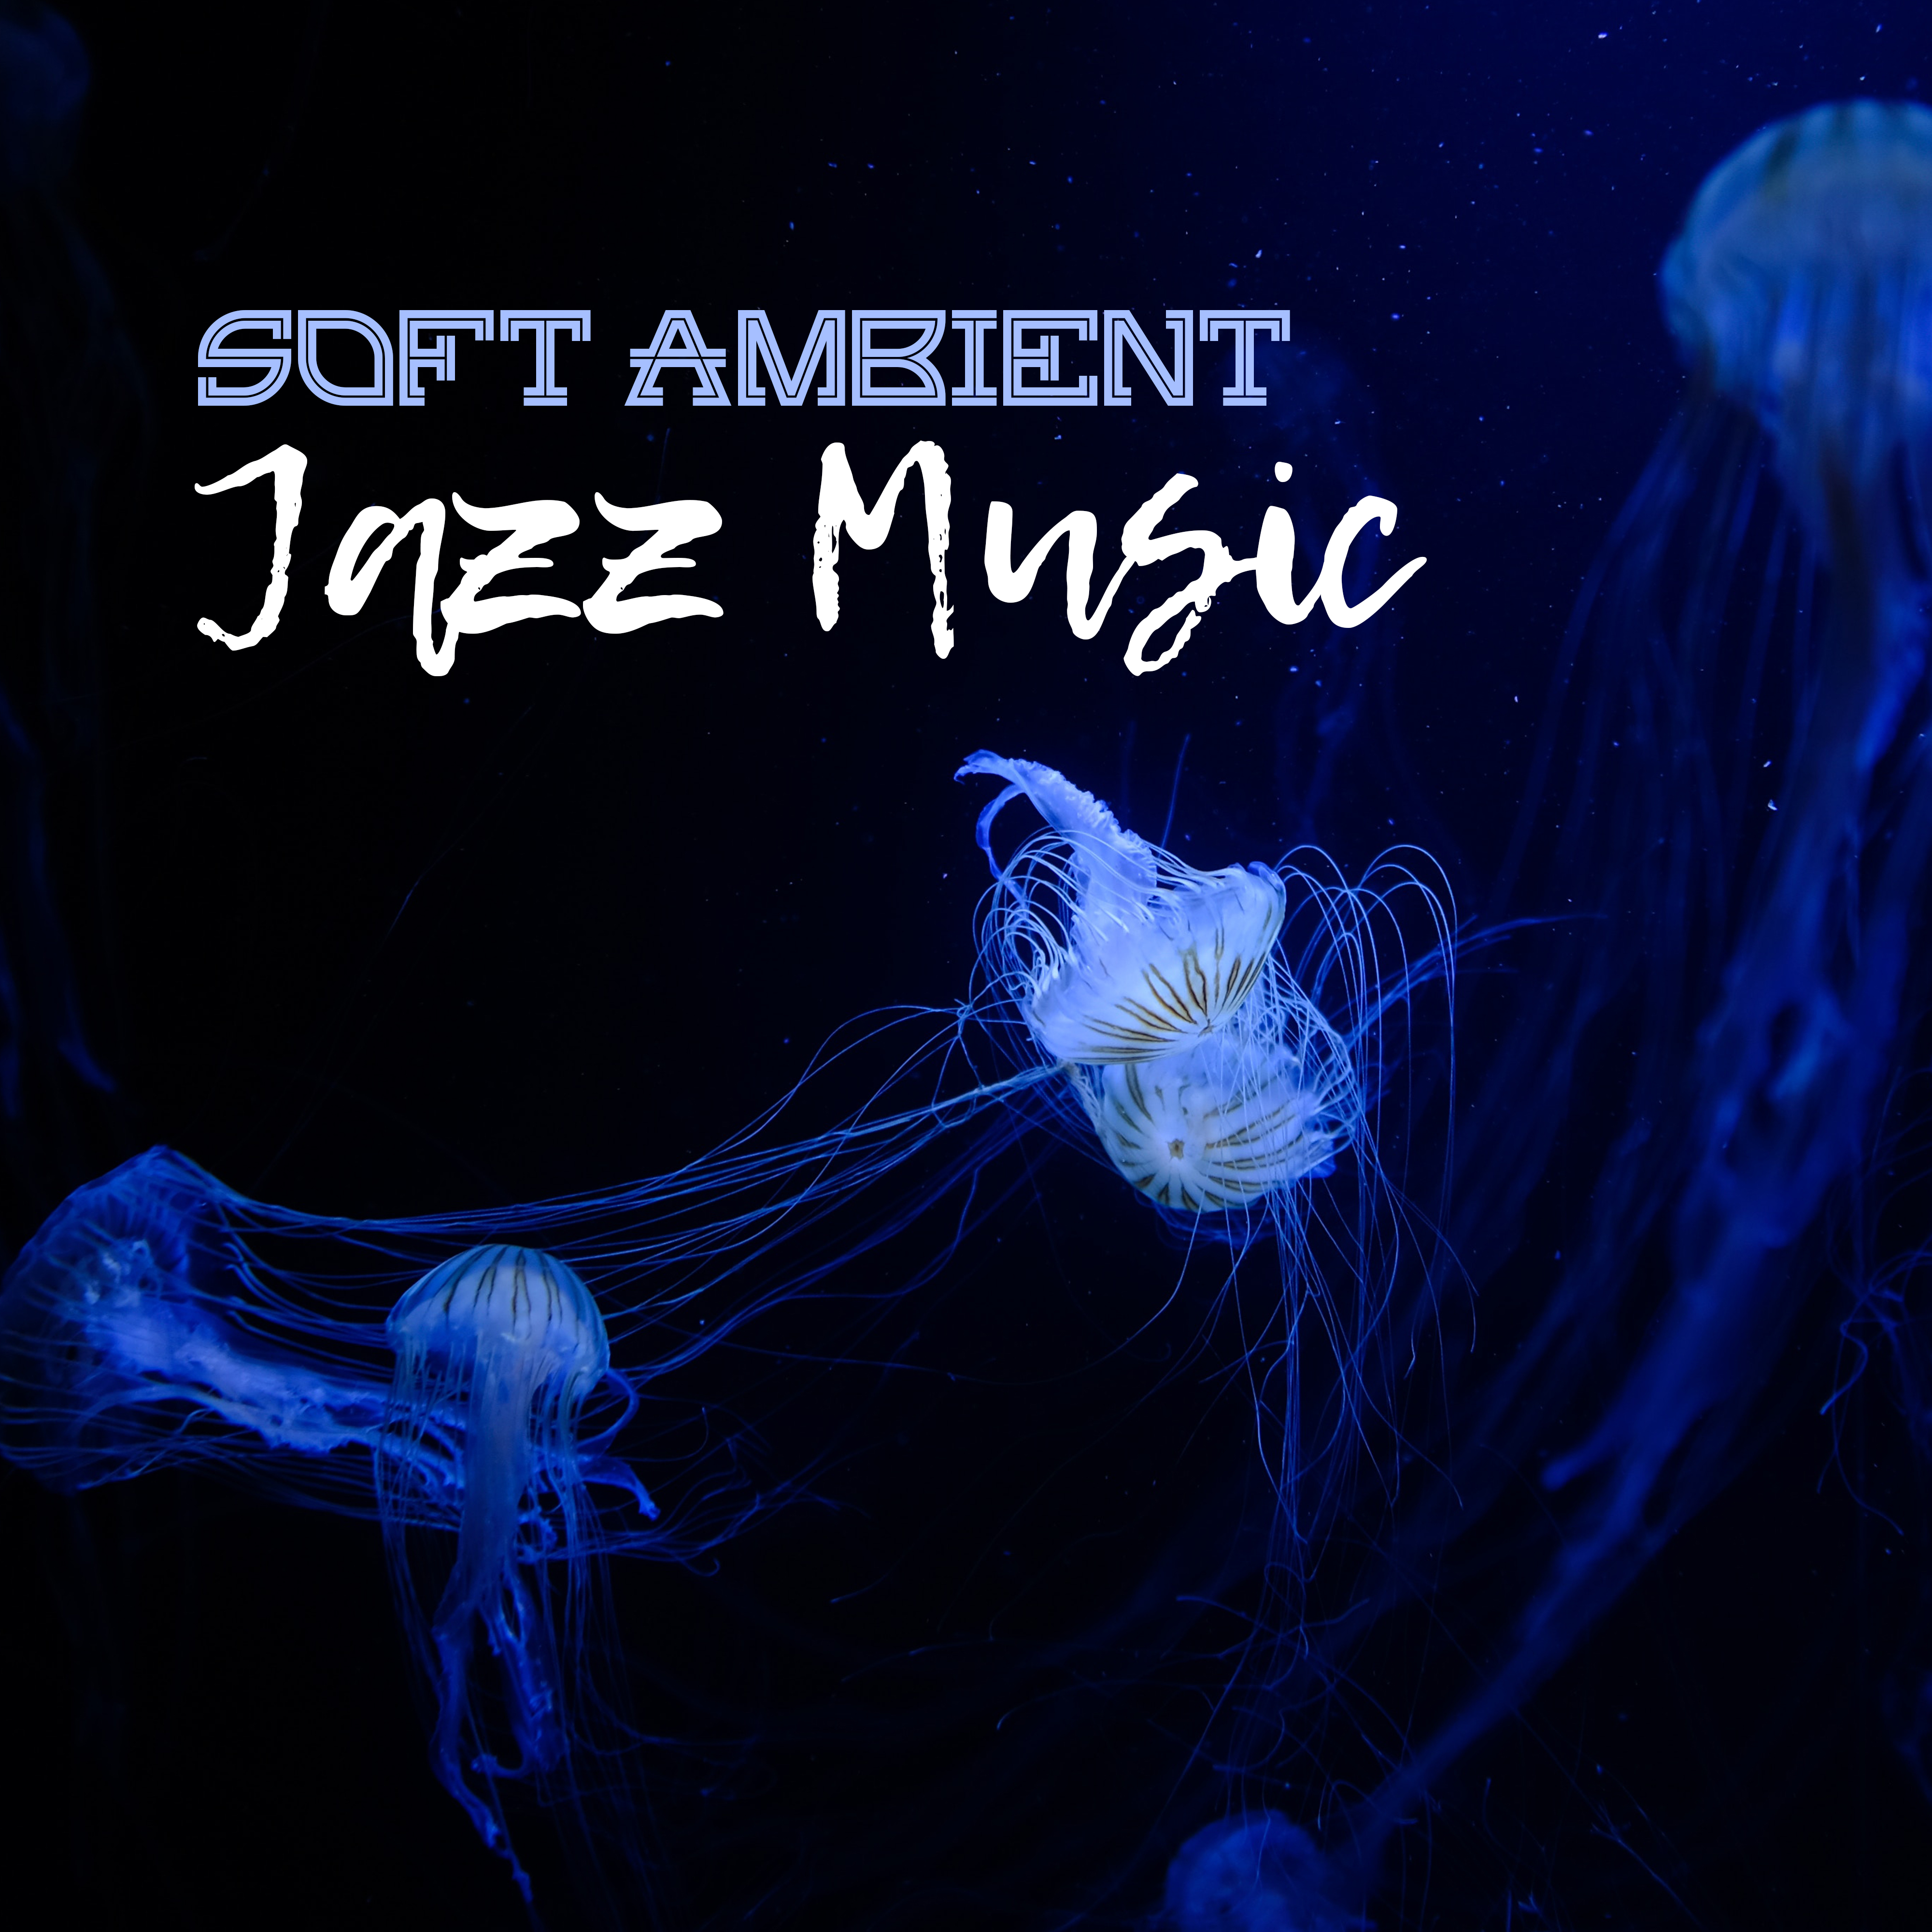 Soft Ambient Jazz Music  Easy Listening, Stress Relief, Ambient Jazz, Piano Sounds, Instrumental Melodies